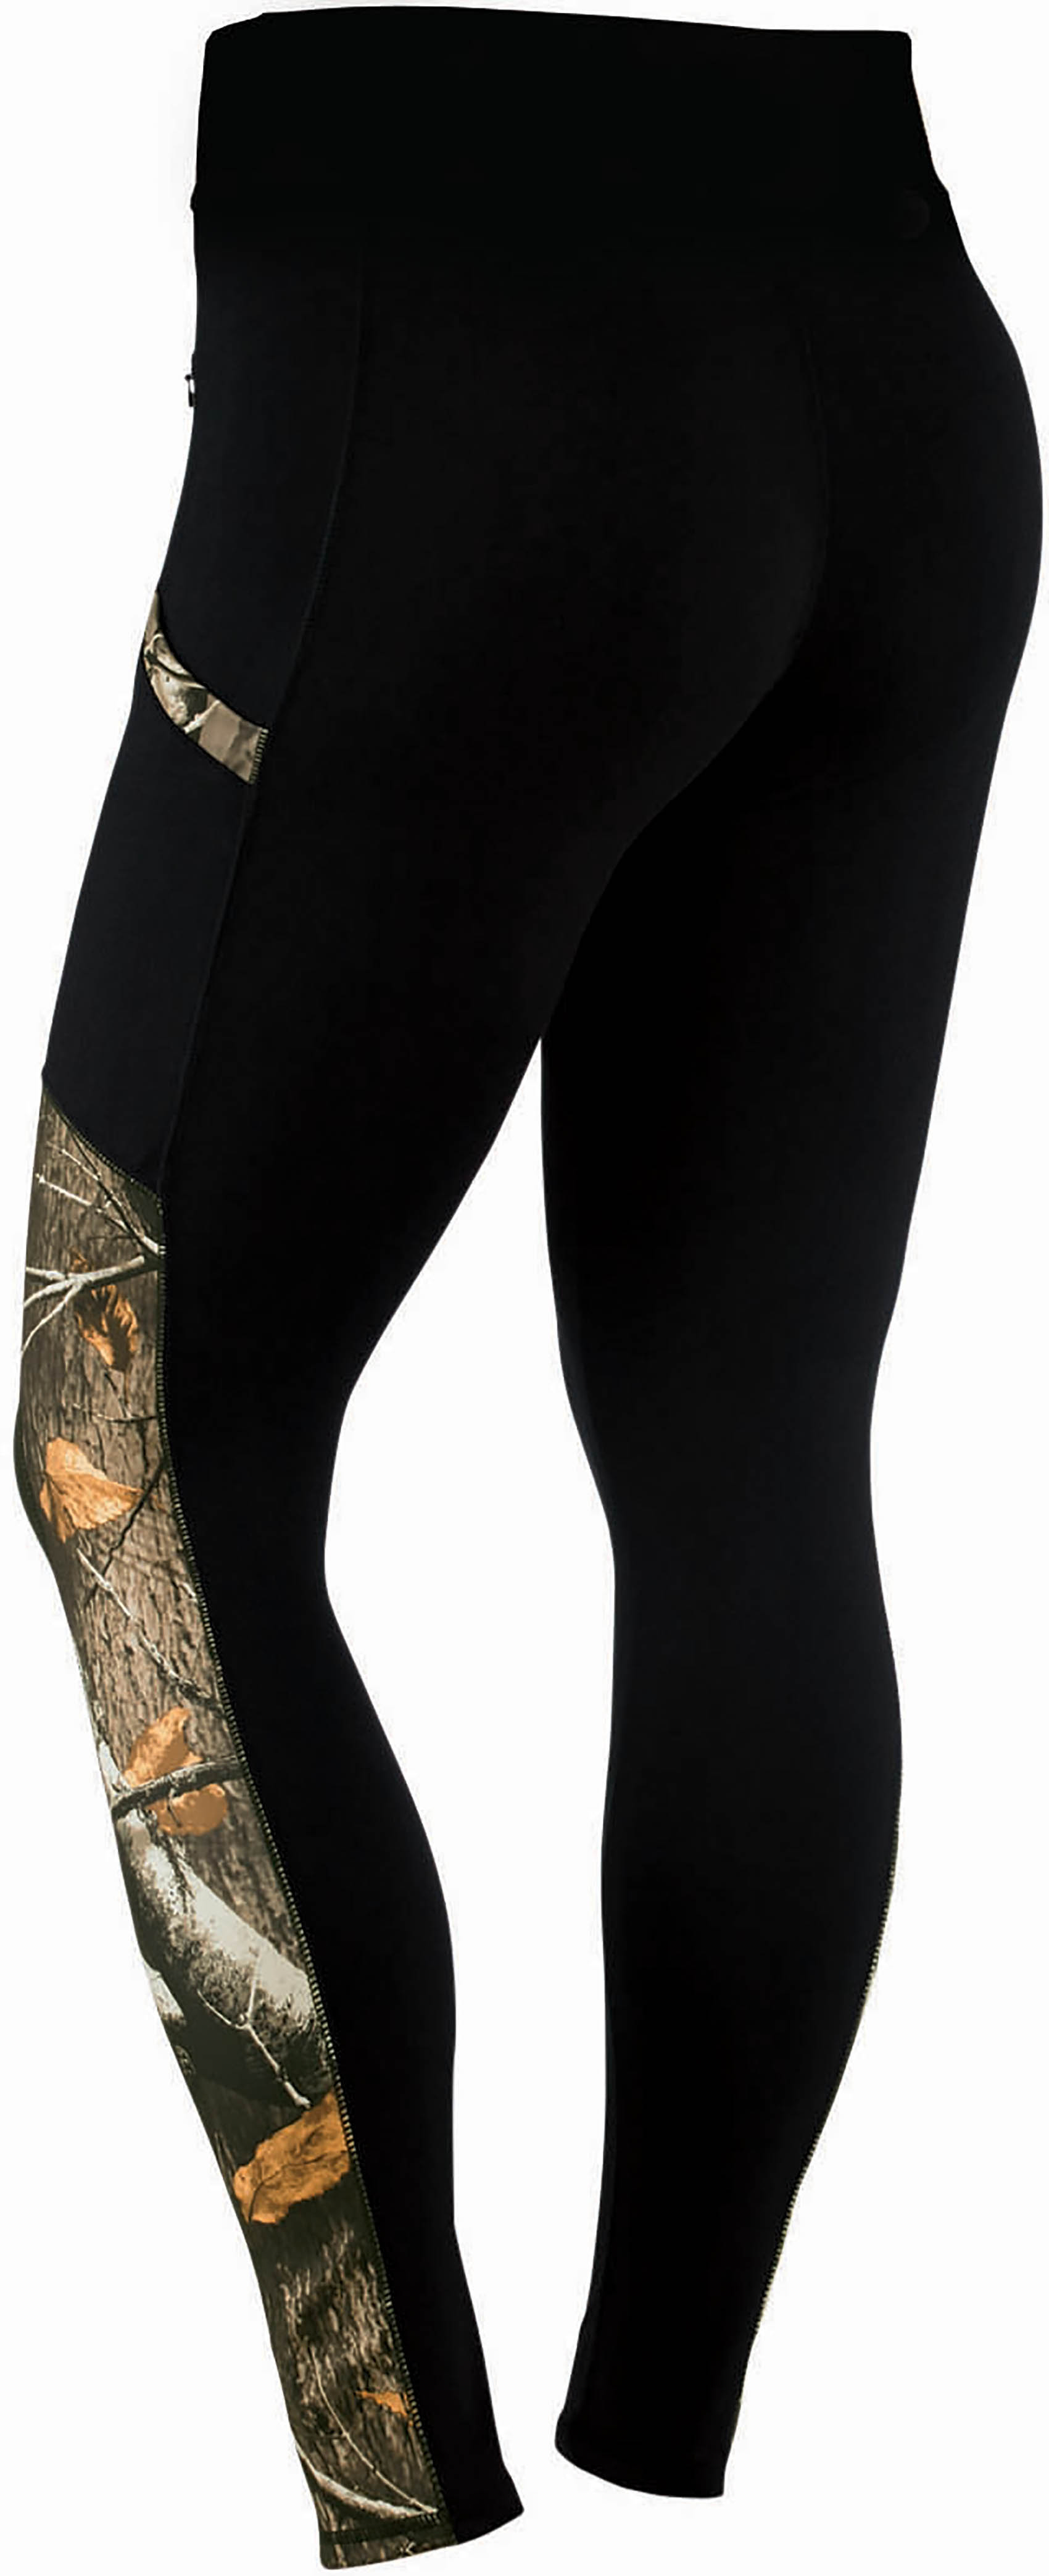 Legendary Whitetail Camo Leggings For Sale In Nc